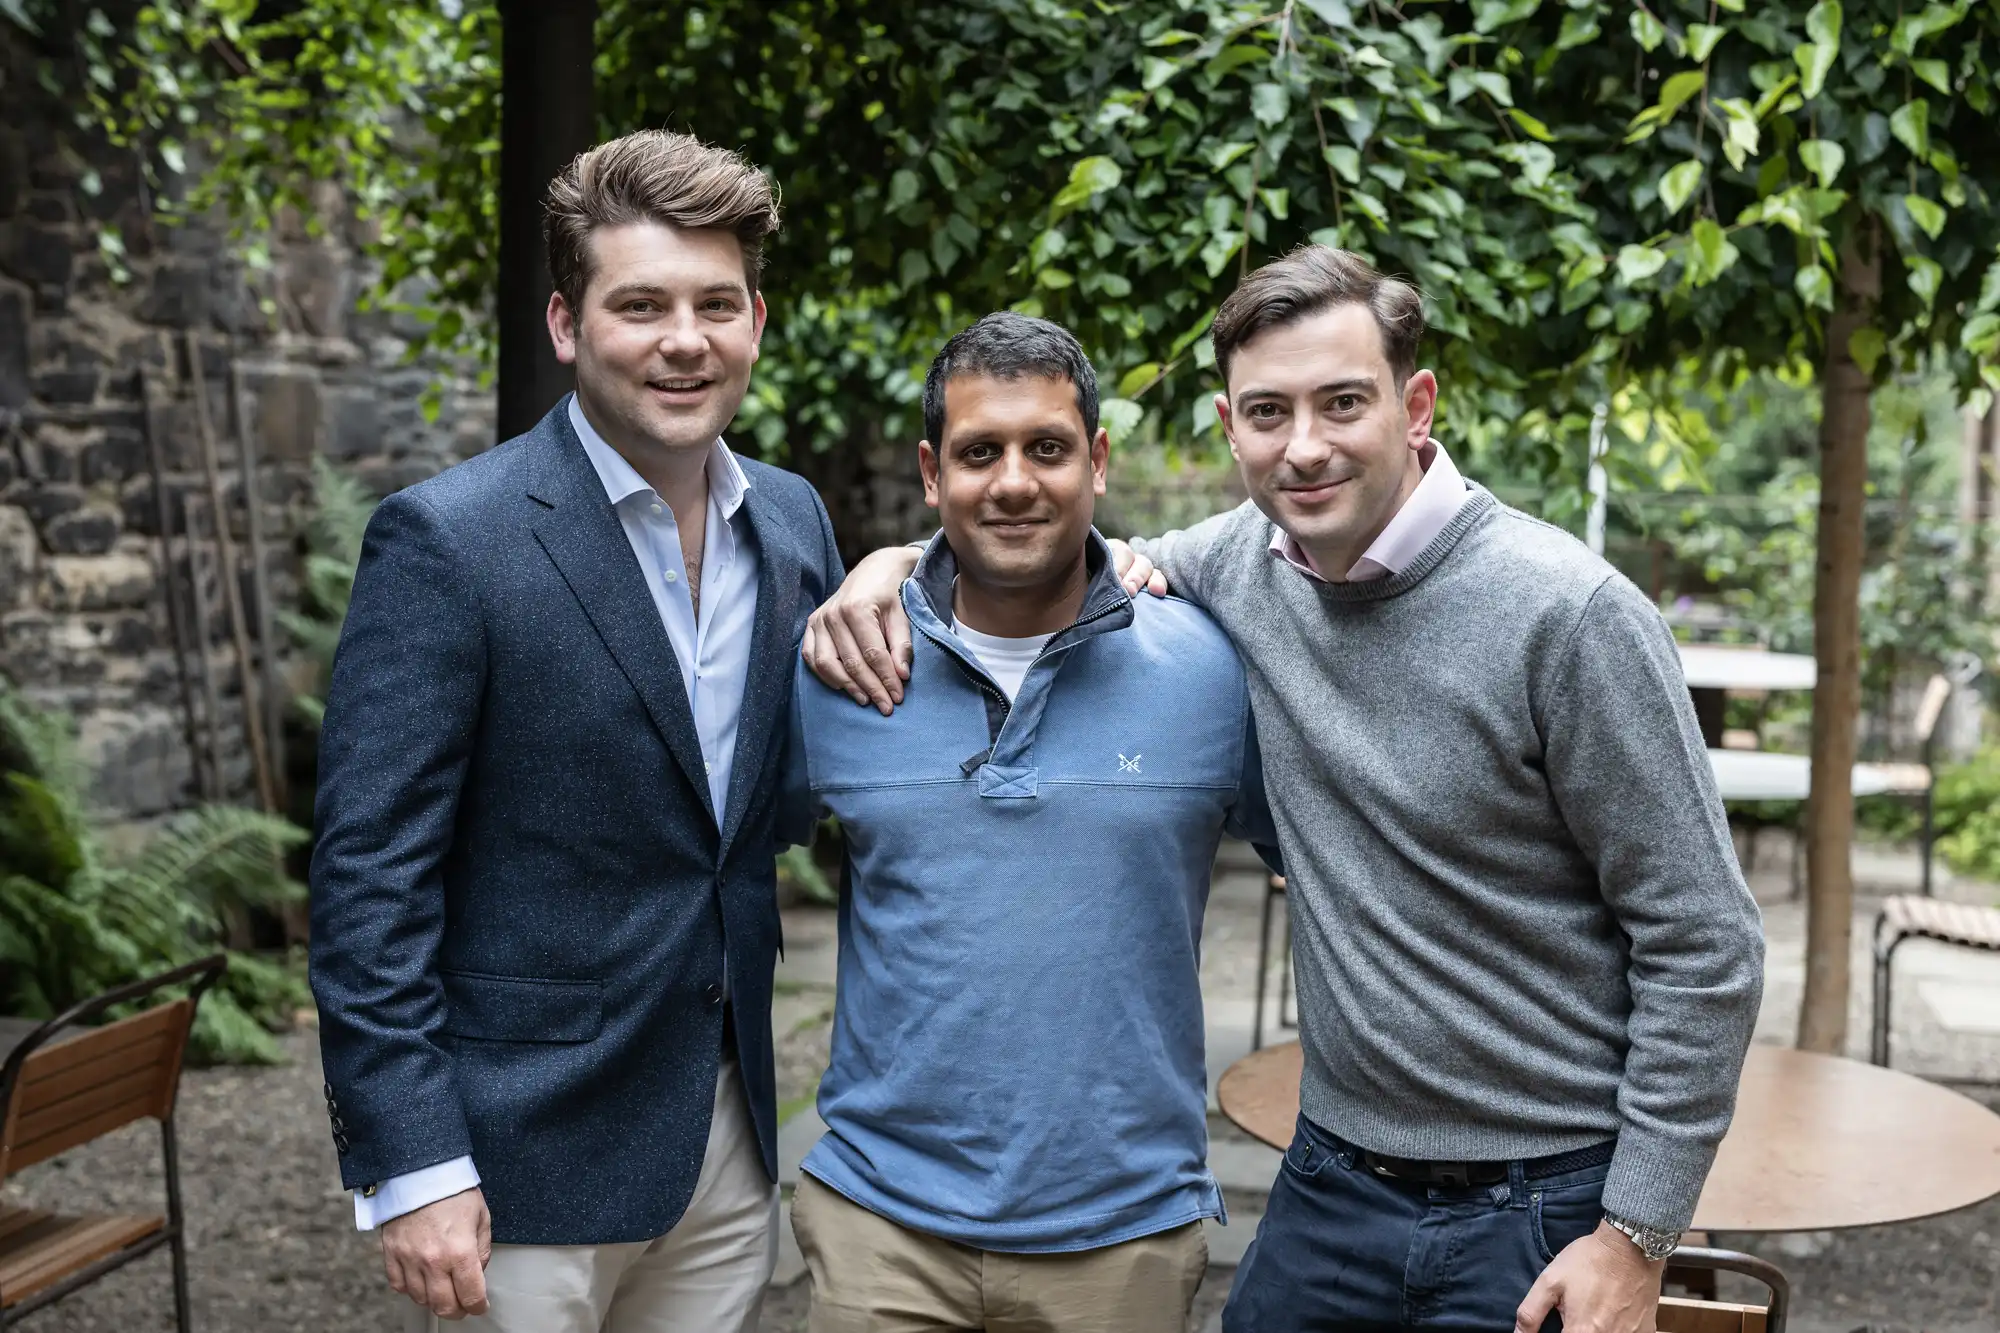 Three men smiling at the camera in a garden setting, two in sweaters and one in a polo shirt.